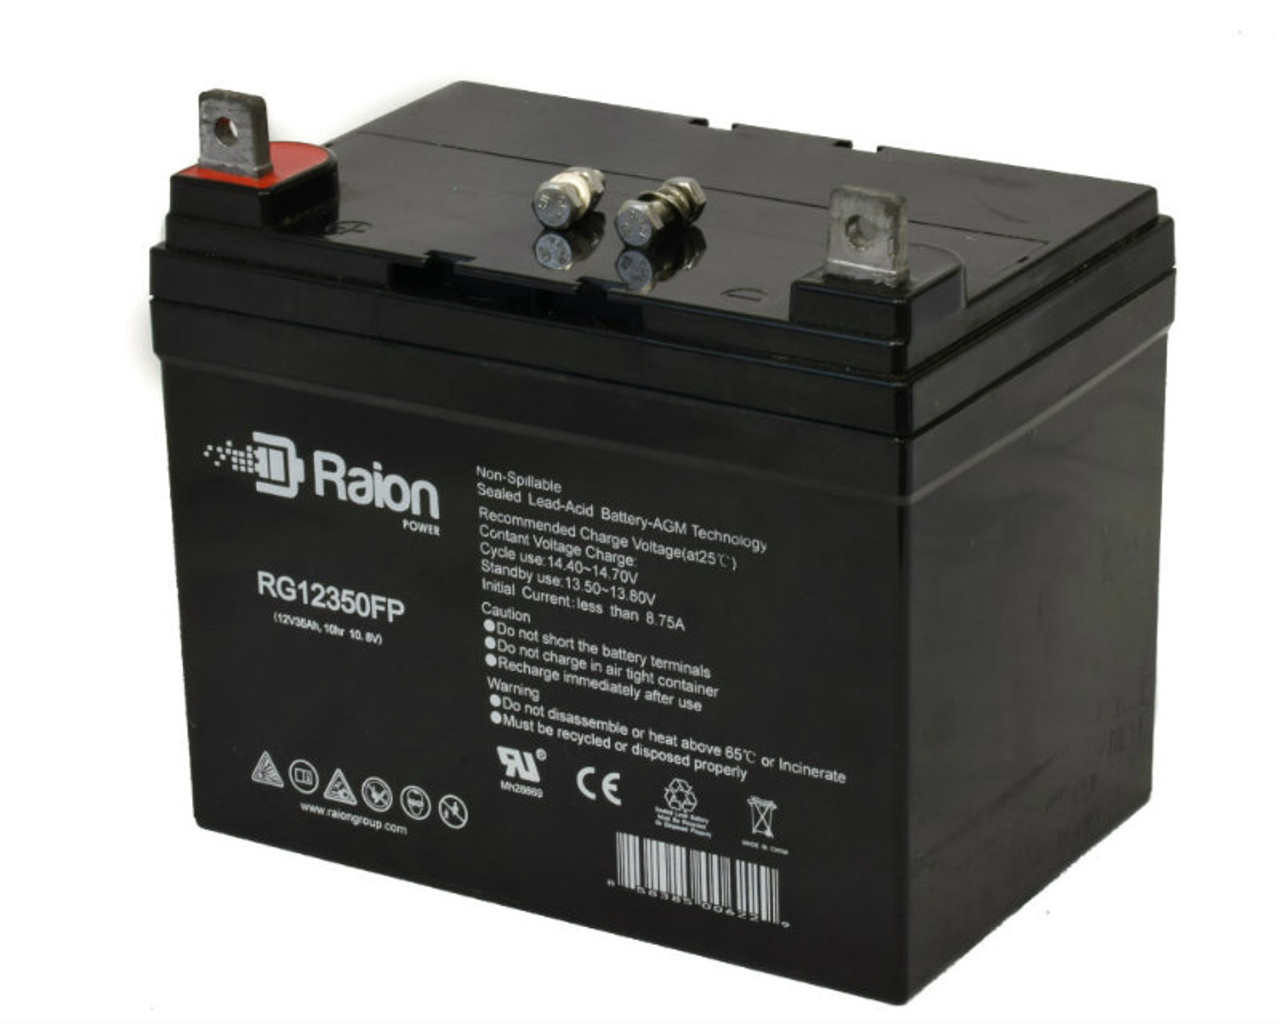 Raion Power Replacement 12V 35Ah Battery for Tysonic TY12-35 - 1 Pack